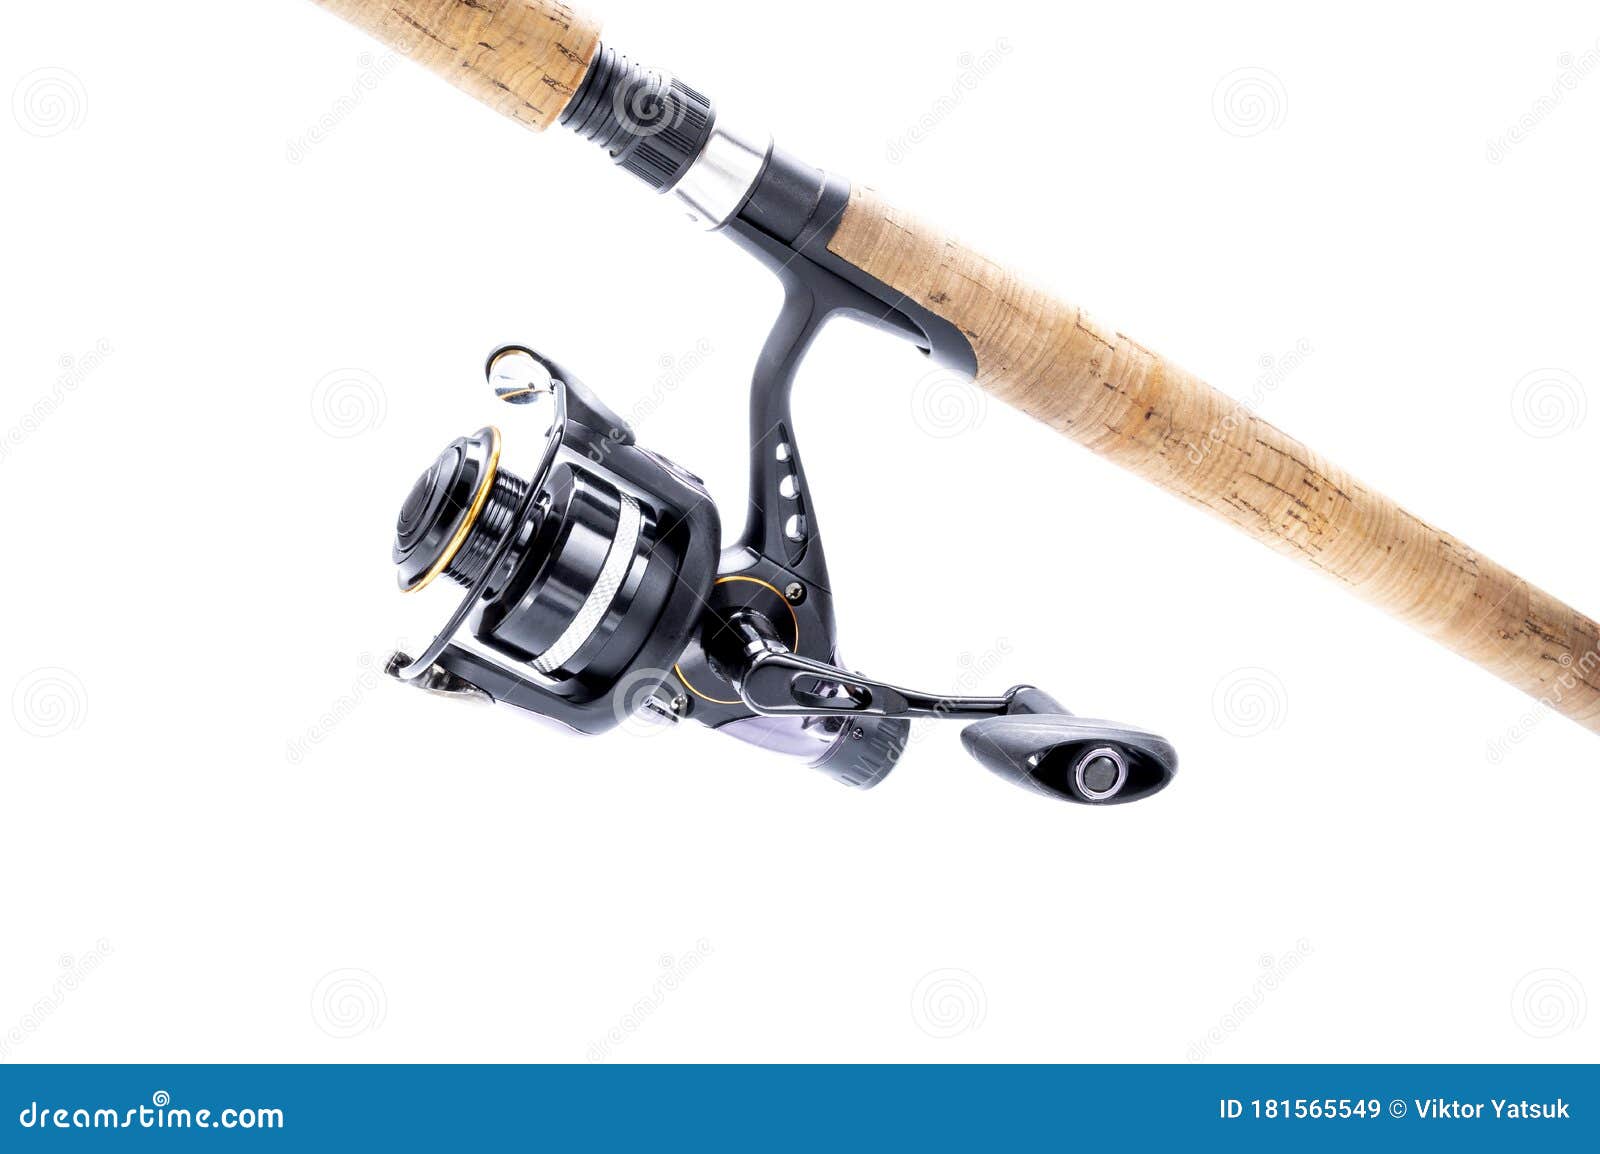 Fishing Reel and Spinning. Fishing Gear Stock Image - Image of